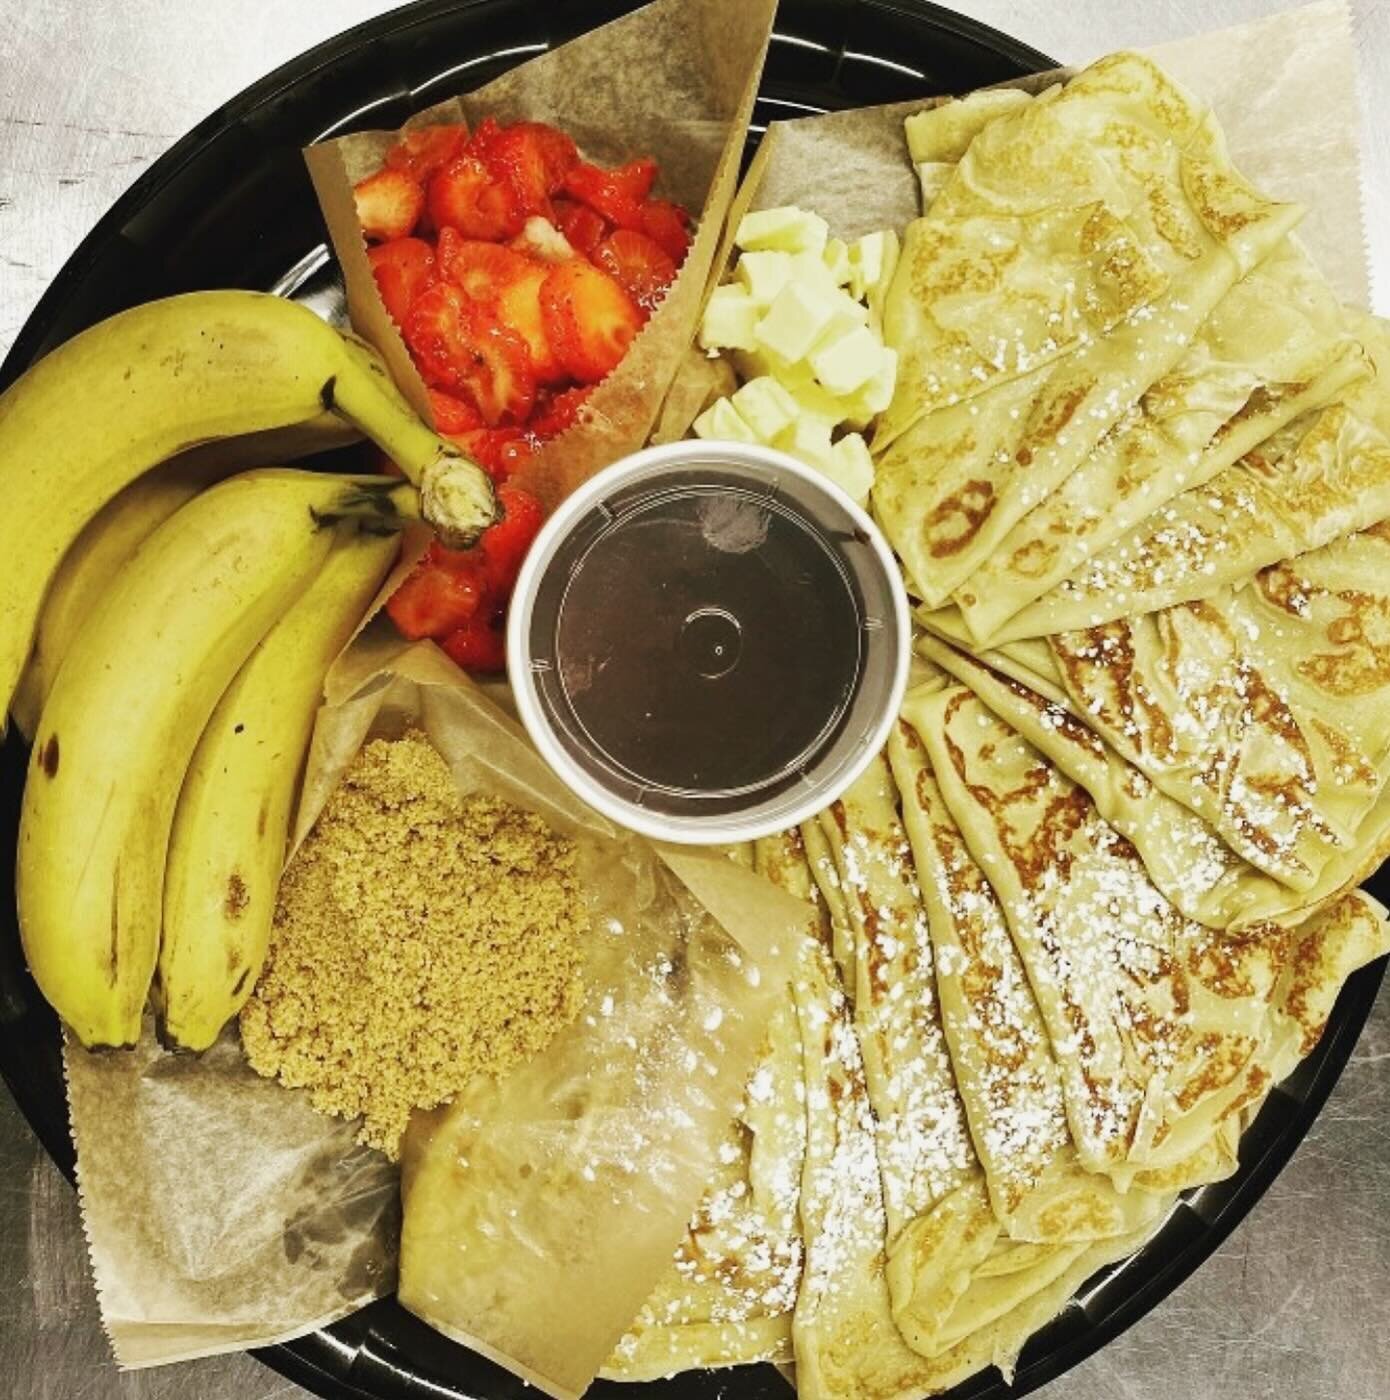 A Crepe platter for your next social function?? Yes please! Did you know Perk offers catering?
1. Hassle free- you can order online!
2. You can order well in advance, or with just two hours notice
3. Everything is aways fresh and delicious
4. We can 